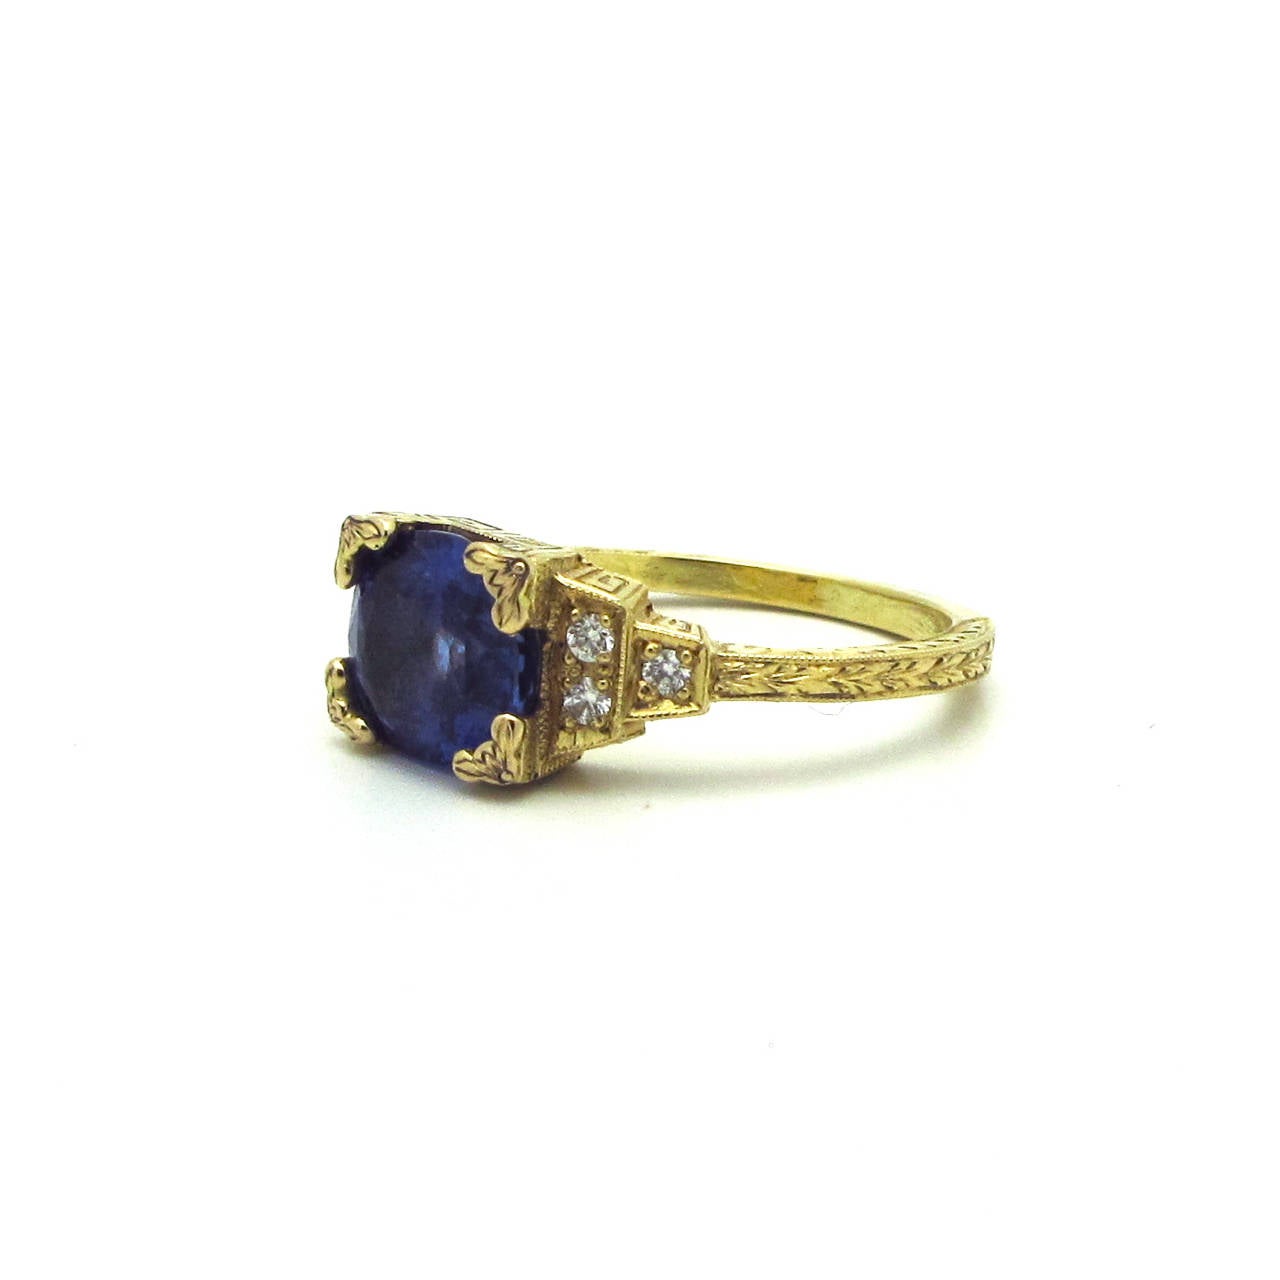 This beautiful Sri Lankan sapphire 3.80cts and diamond 0.12cts ring was made especially for M. Lowe Jewelry by a master goldsmith. The ring is 18 k yellow gold with exquisite hand engraving throughout. It is unusual to find yellow gold in the Art